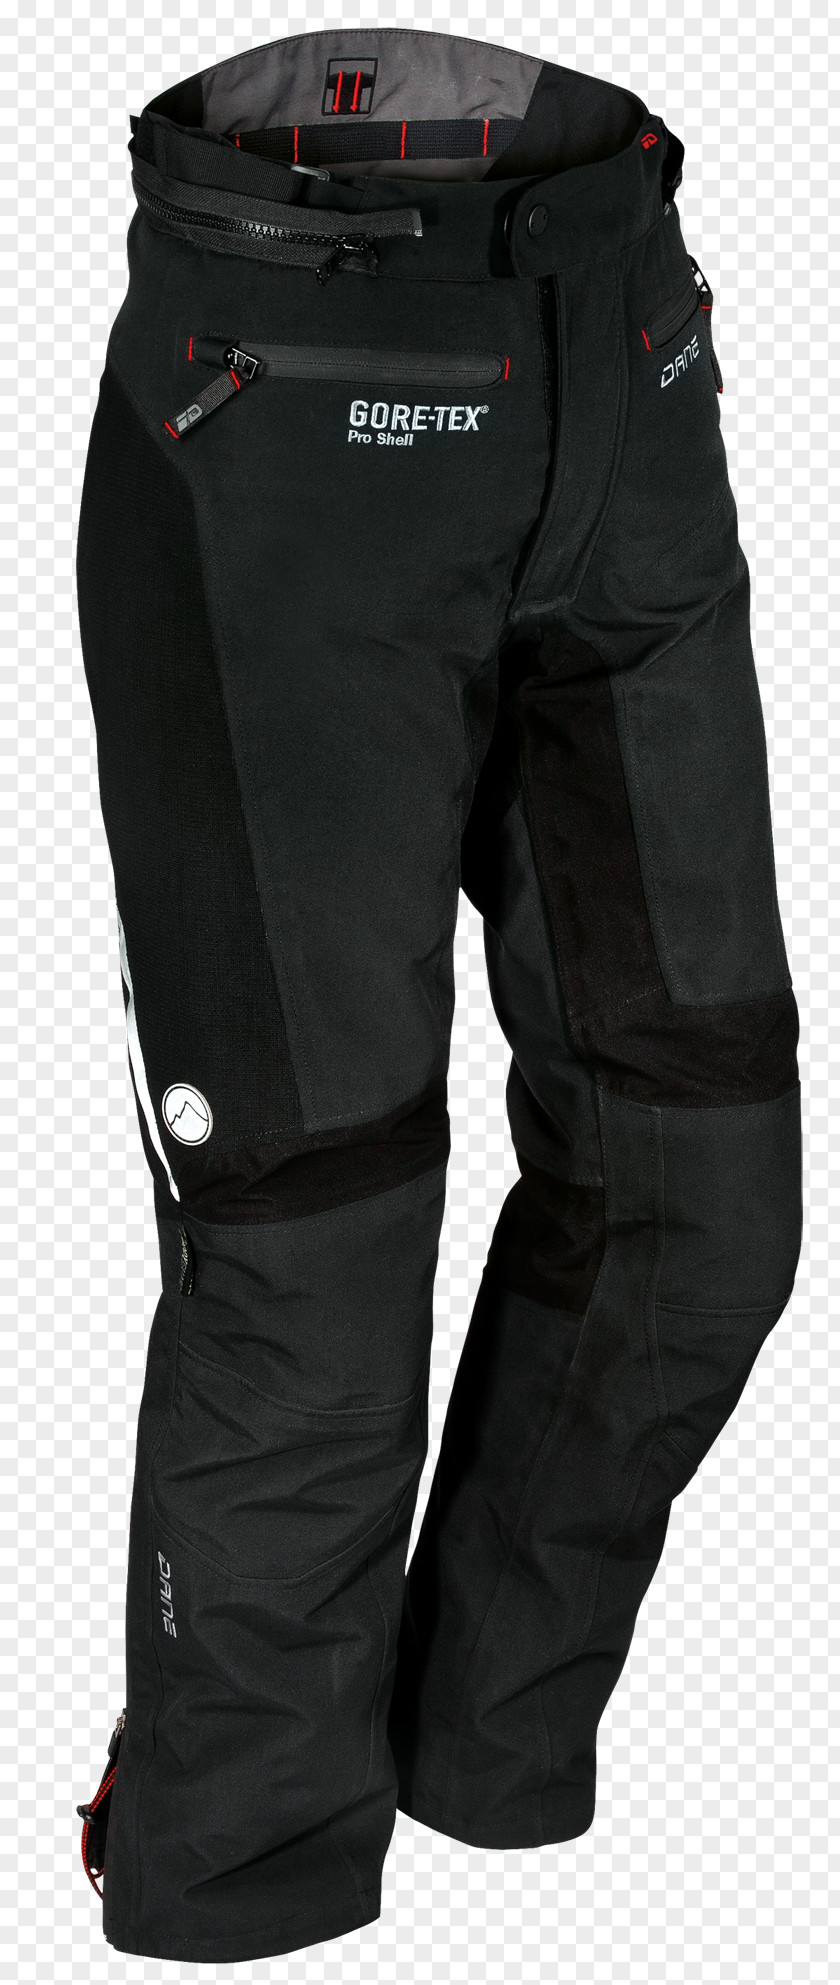 Shell Gore-Tex Pants Motorcycle Personal Protective Equipment Textile PNG